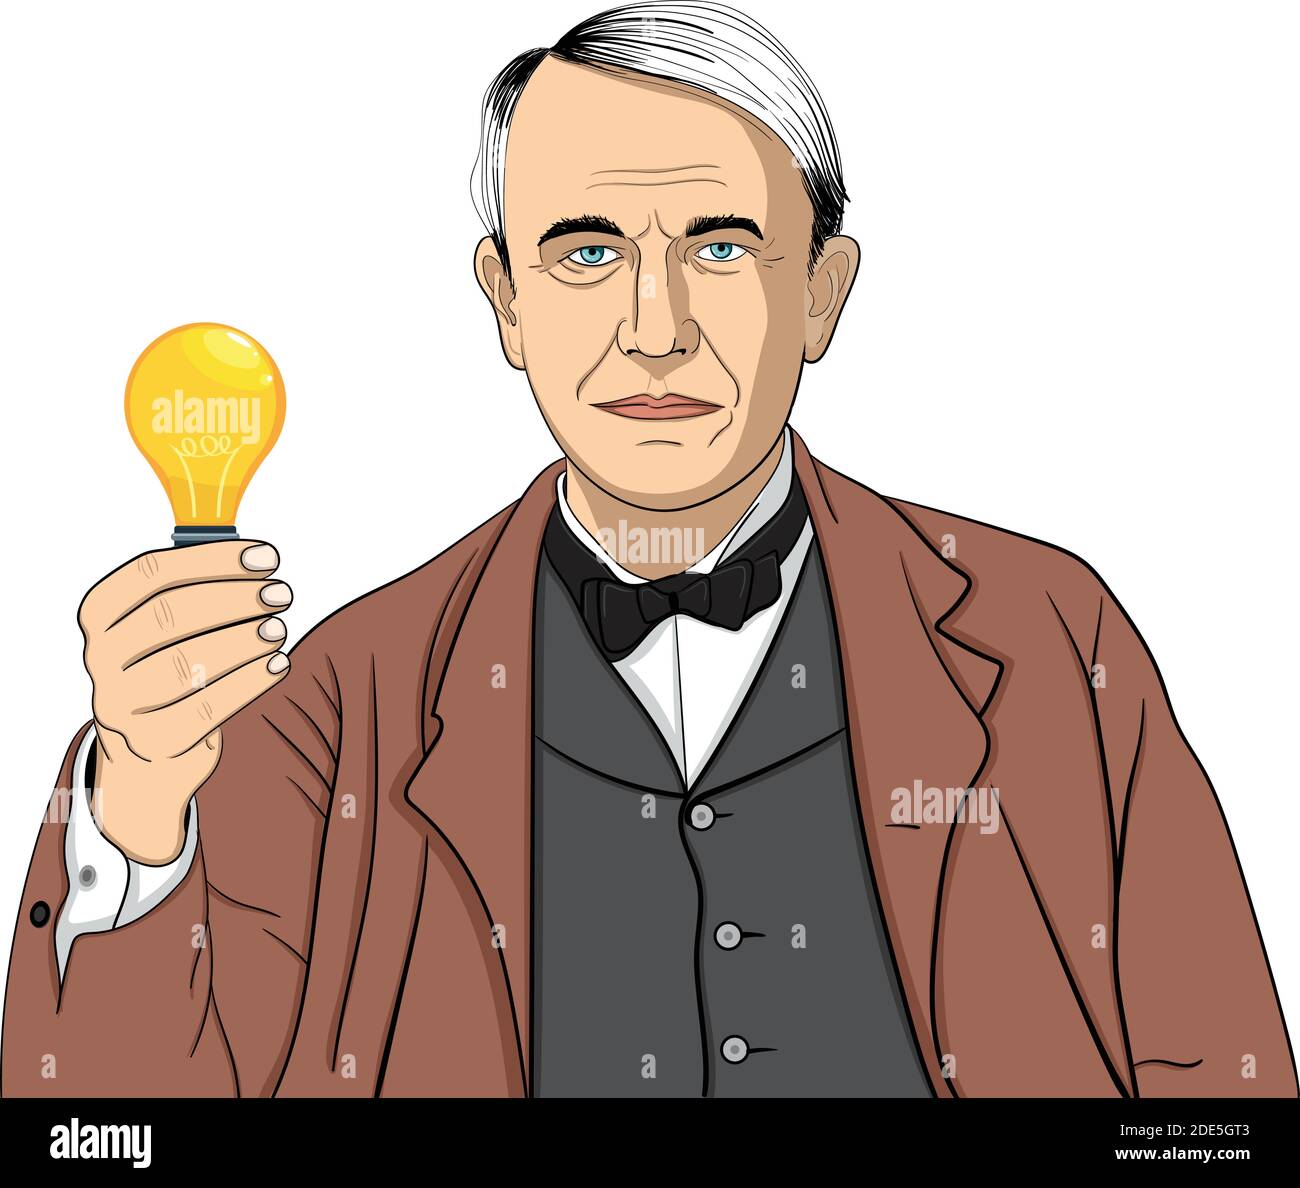 Thomas Alva Edison 18471931 He Was An American Inventor Businessman  And One Of The First Inventors To Apply The Principles Of Mass Production  Vintage Line Drawing Or Engraving Illustration Royalty Free SVG